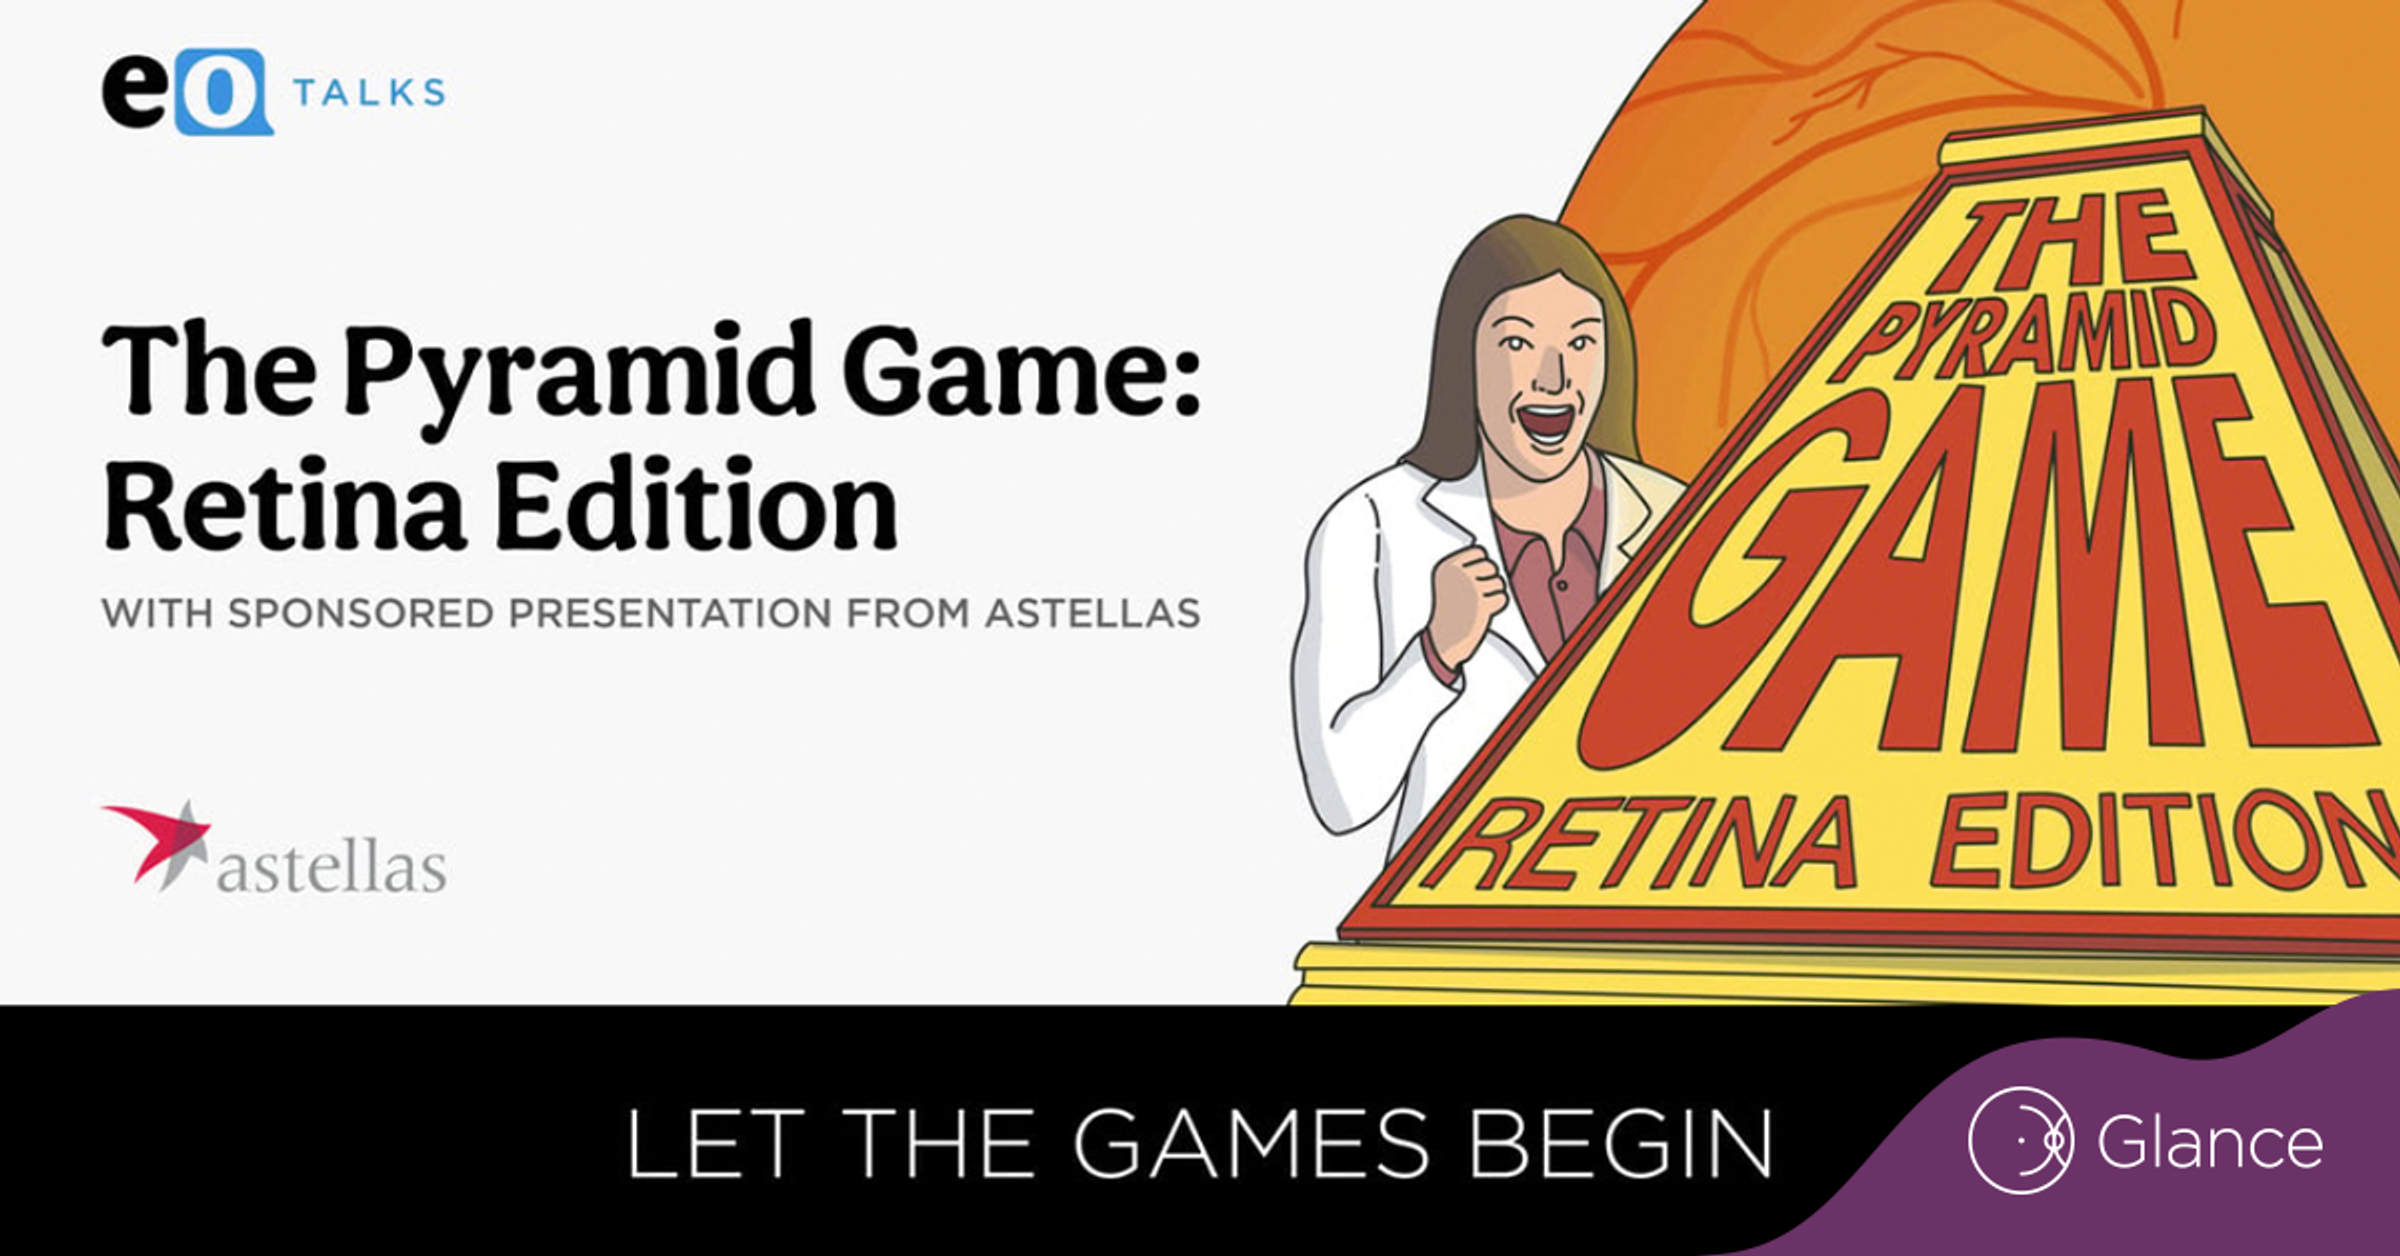 Retina-themed Pyramid Game to feature all-star ECP lineup